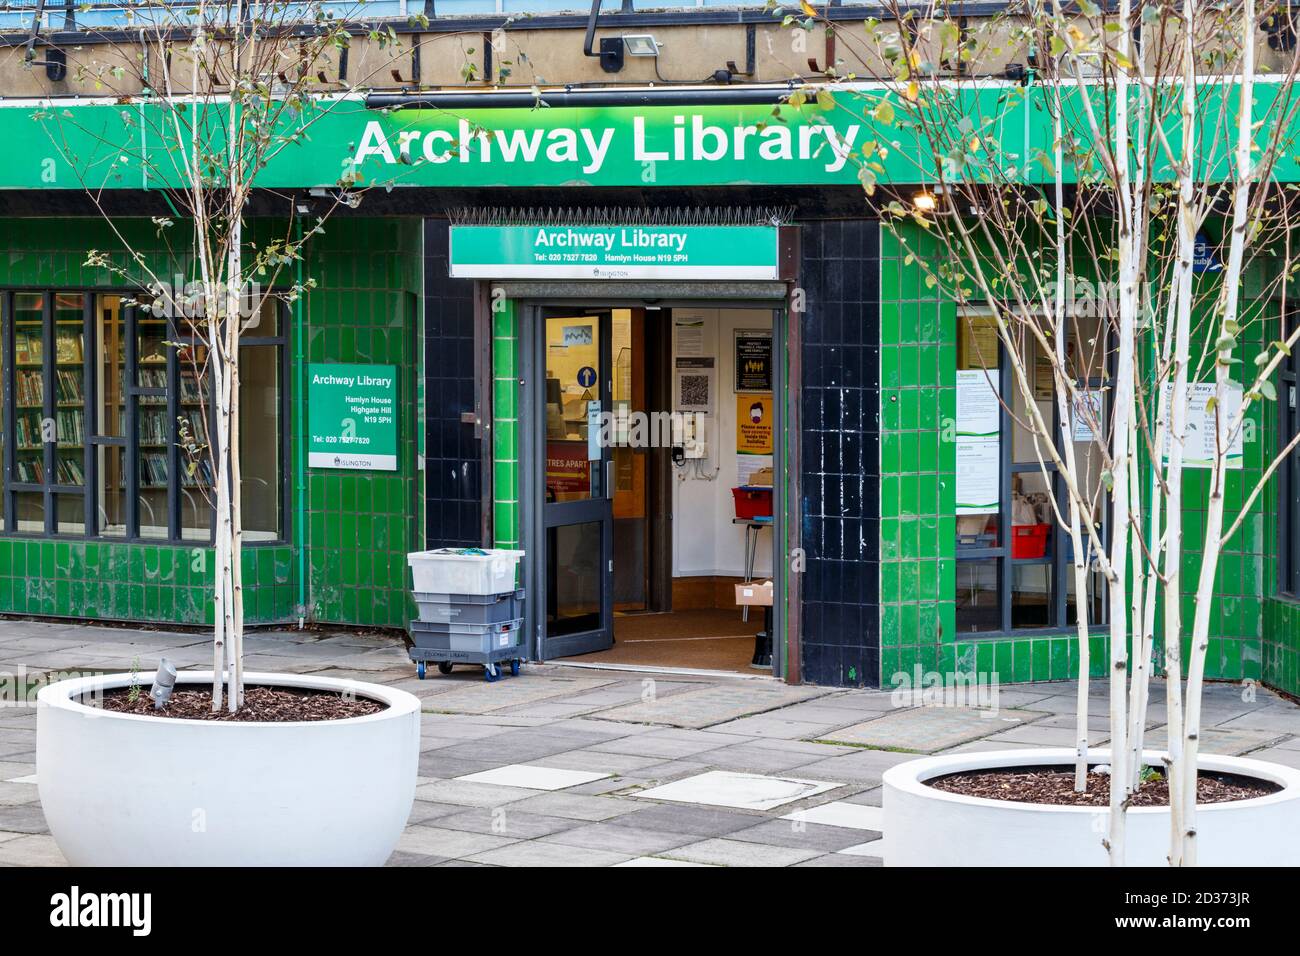 Archway Library in Islington, reopened after the easing of coronavirus lockdown restrictions, London, UK Stock Photo